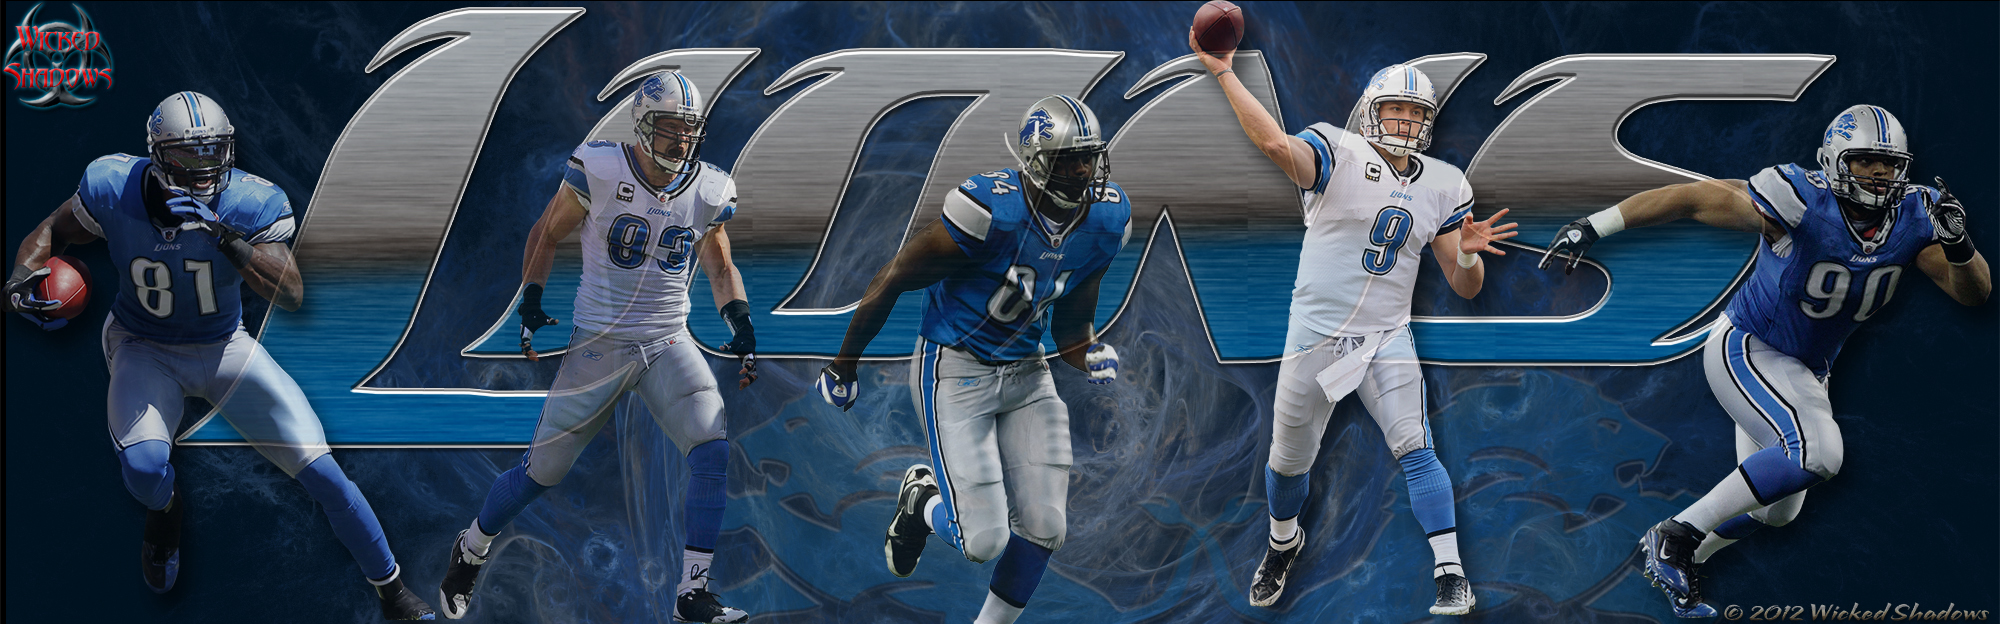 Wallpapers By Wicked Shadows Detroit Lions NFL wallpapers